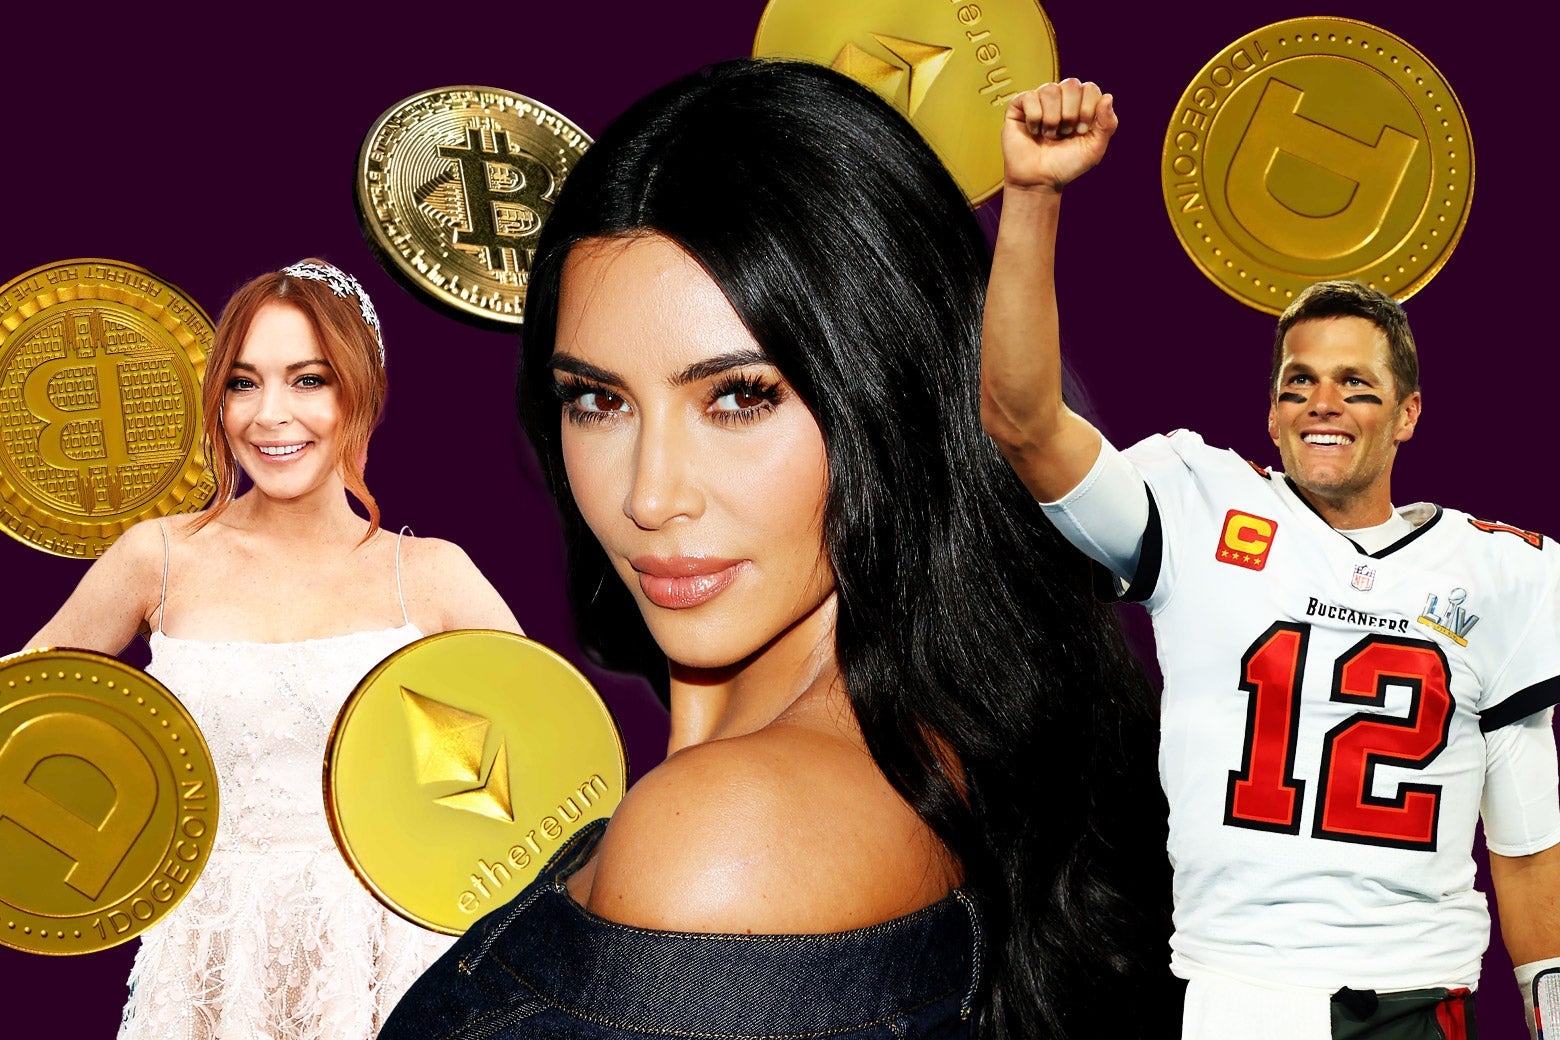 Lindsay Lohan, Kim Kardashian, and Tom Brady surrounded by Bitcoins and other cryptocurrency.